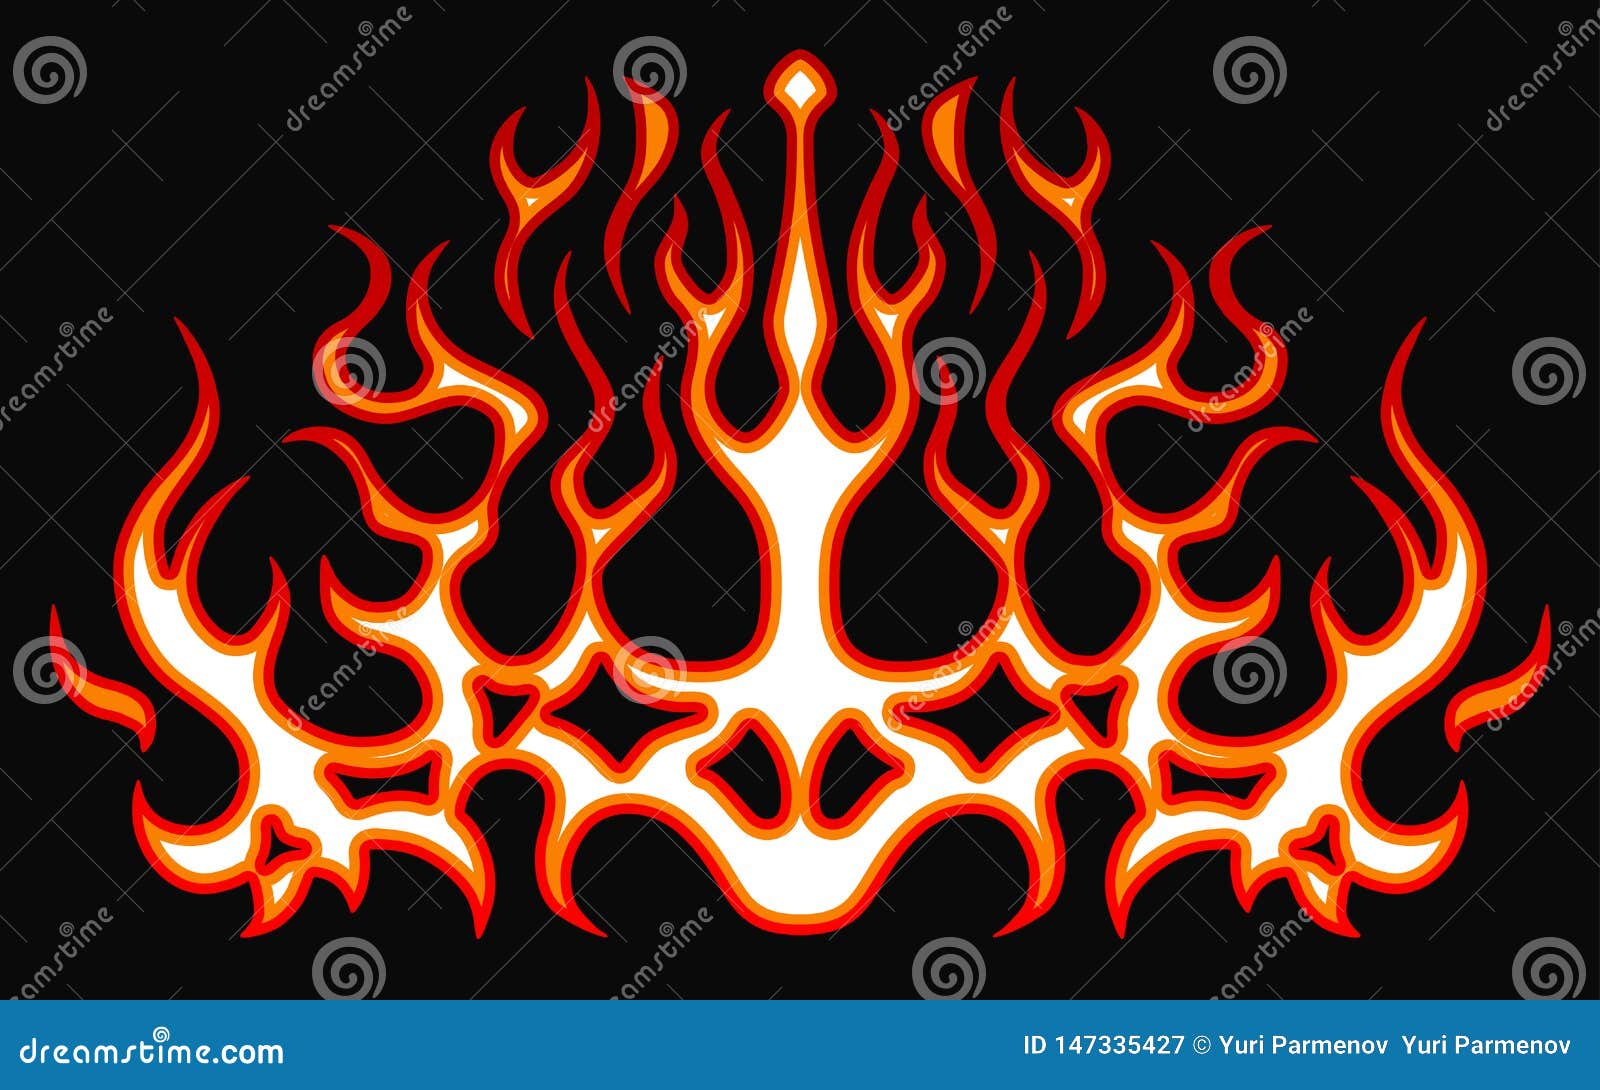 Blazing Fire Decals For The Hood Of The Car Hot Rod Racing Flames - flamecar decal roblox